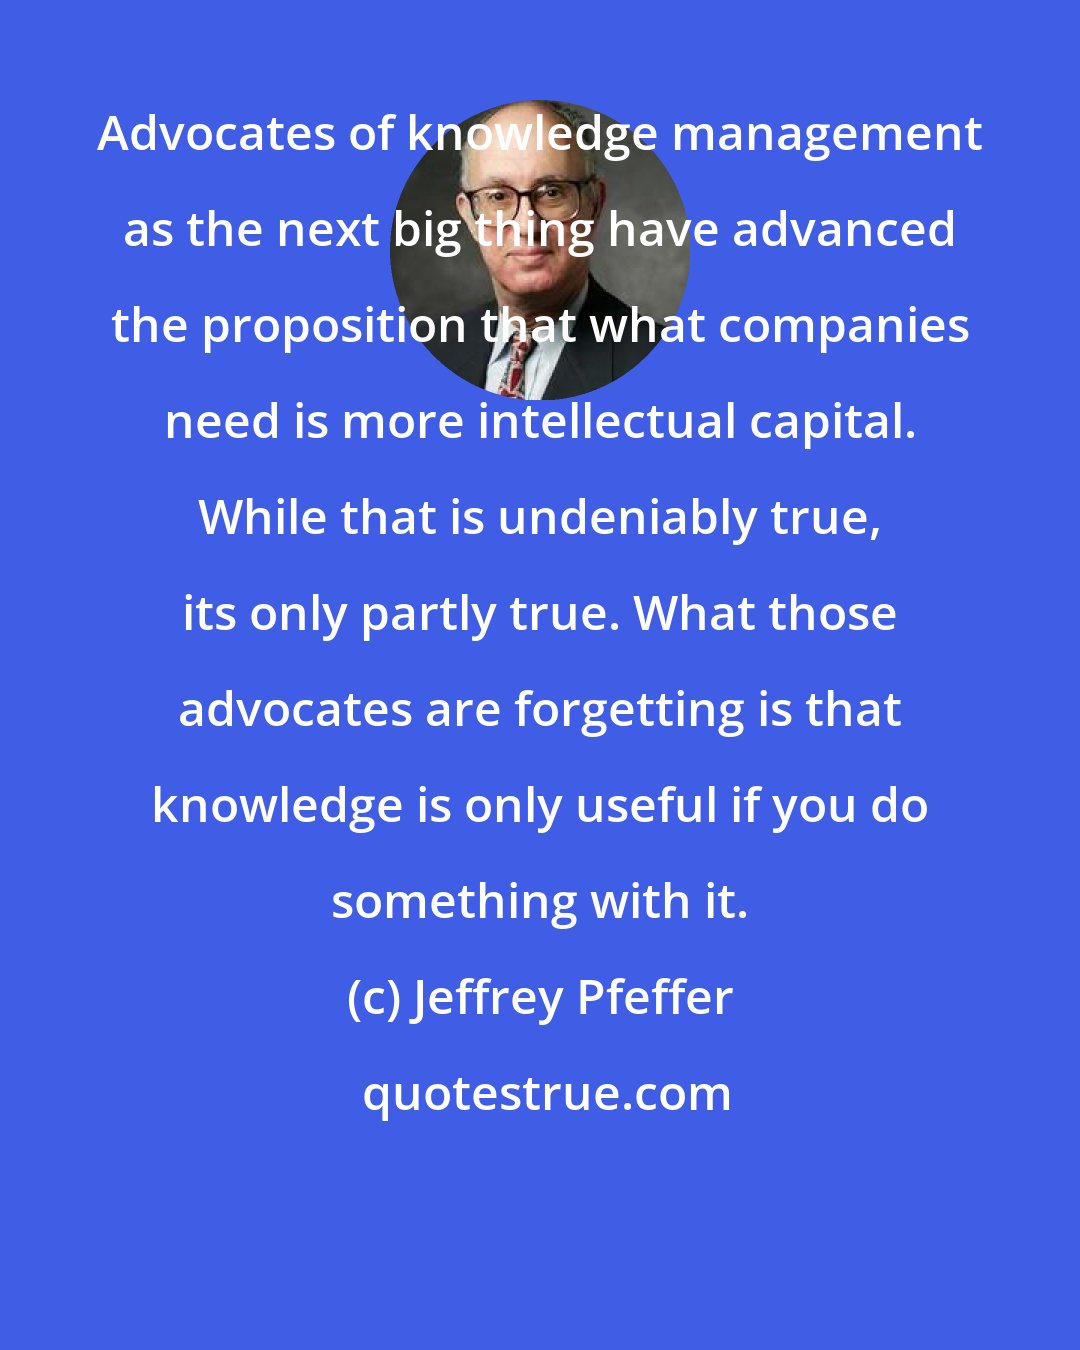 Jeffrey Pfeffer: Advocates of knowledge management as the next big thing have advanced the proposition that what companies need is more intellectual capital. While that is undeniably true, its only partly true. What those advocates are forgetting is that knowledge is only useful if you do something with it.